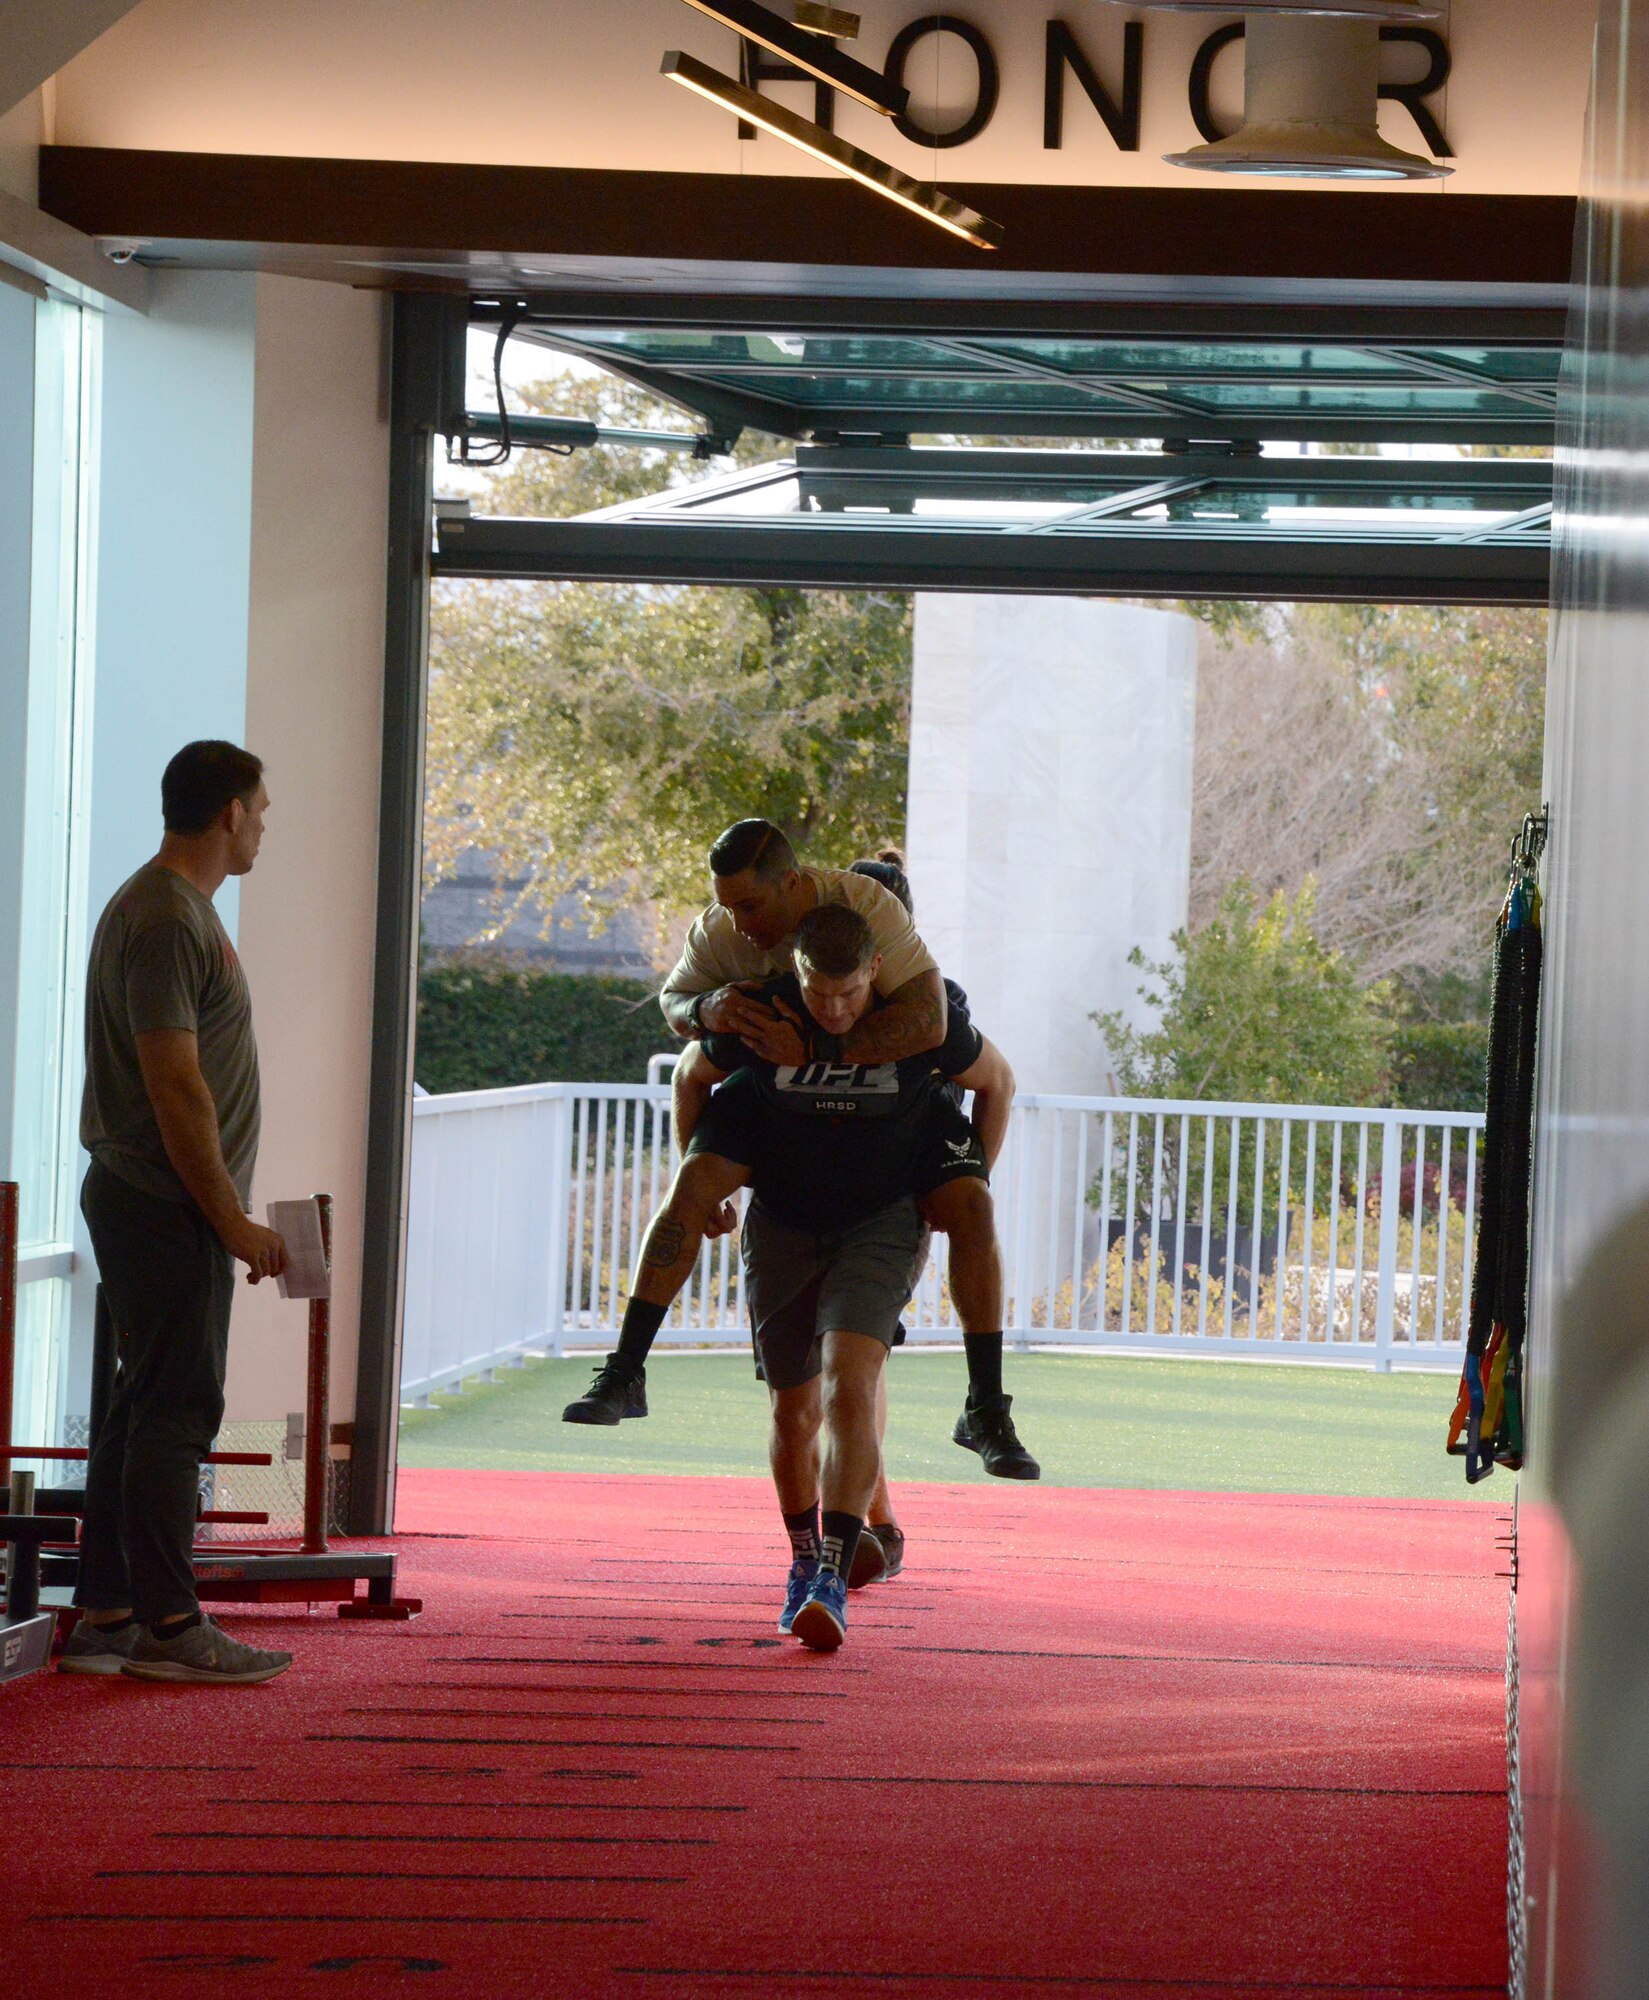 A special warfare Airman and Ultimate Fighting Championship fighter Stephen Thompson conduct a rigorous workout as UFC fighter Forrest Griffin looks on during a video production at the UFC Performance Institute in Las Vegas, Nevada.